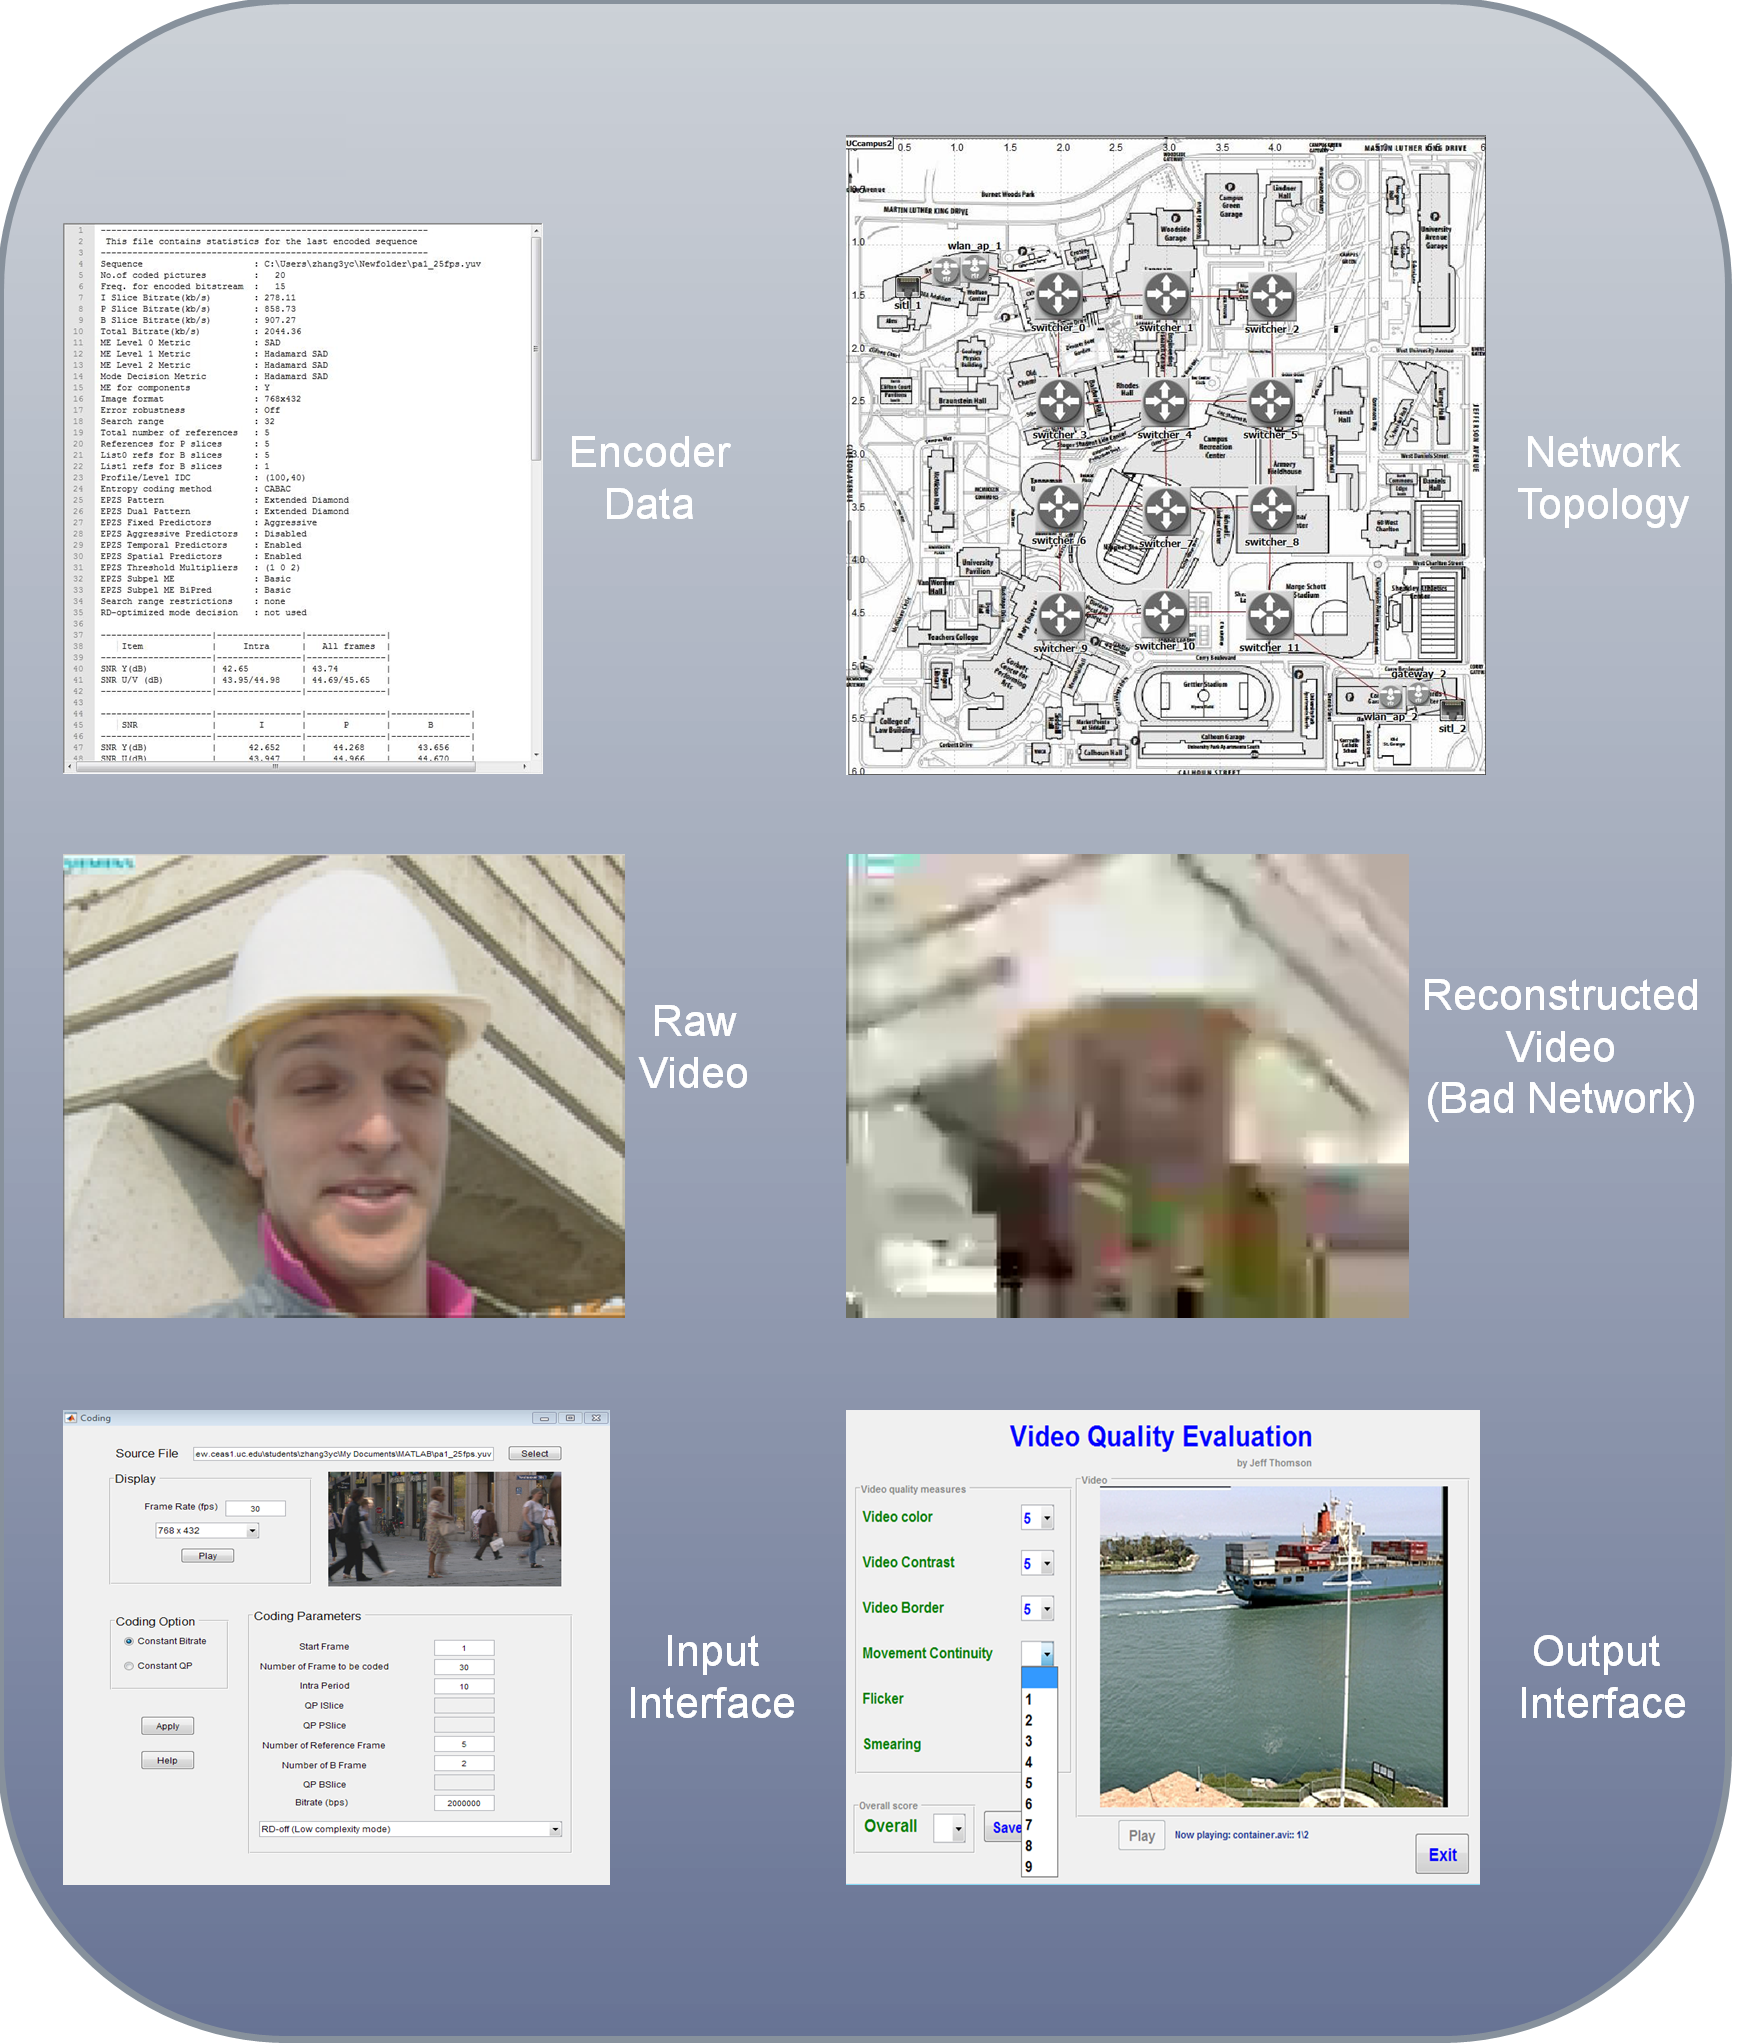 Experience Provisioning for Ubiquitous Wireless Imaging Applications